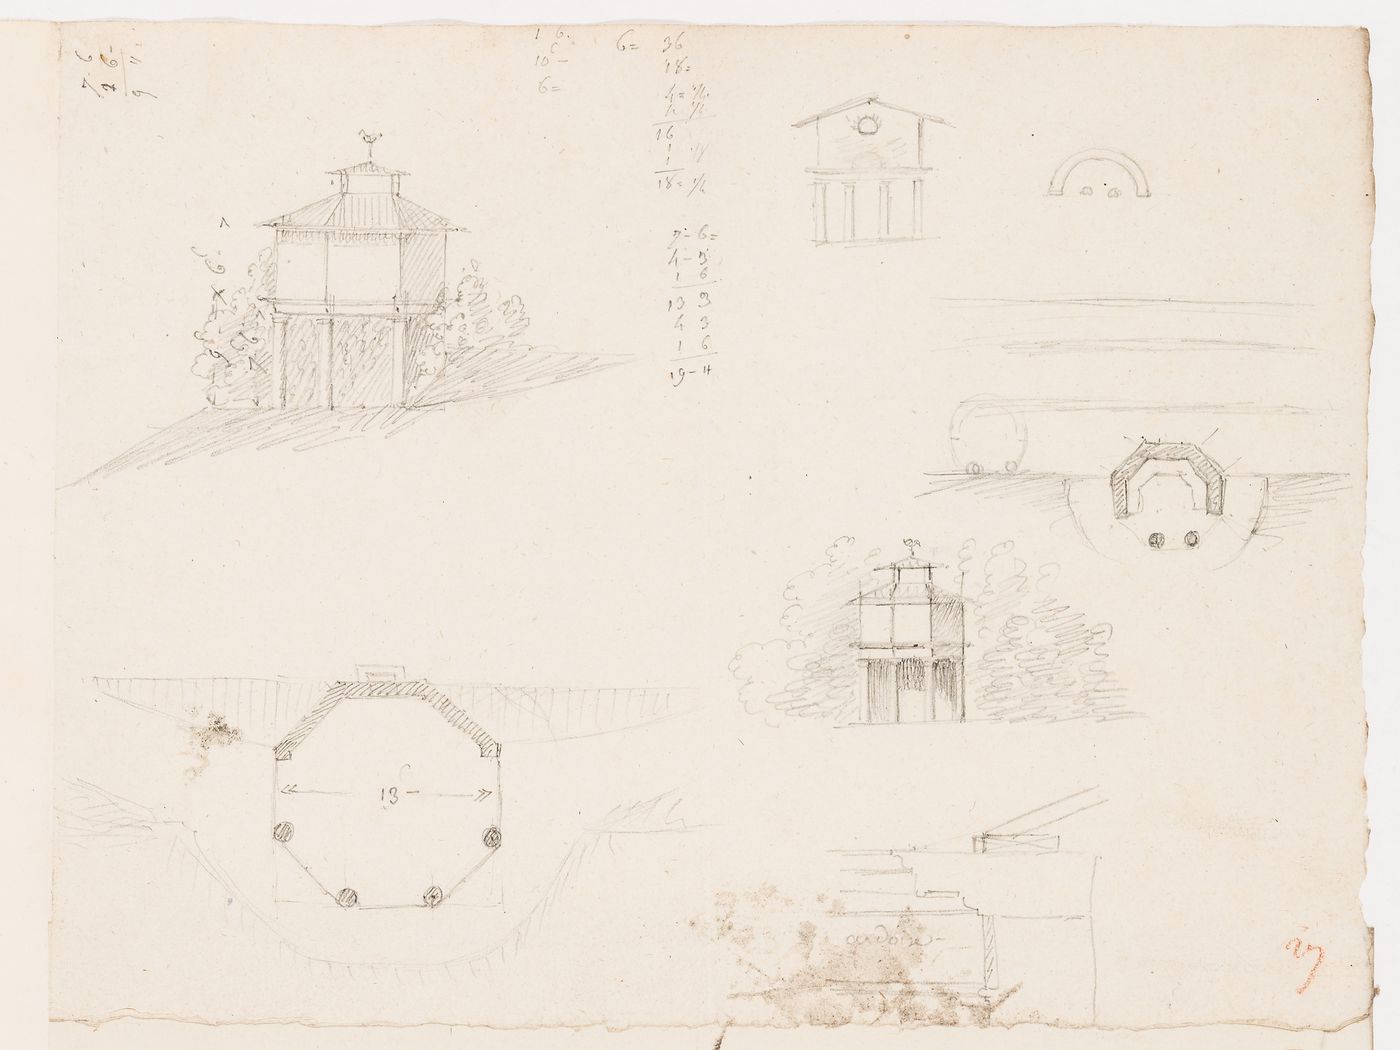 Plans and elevations, possibly for garden pavilions, probably for Domaine de La Vallée